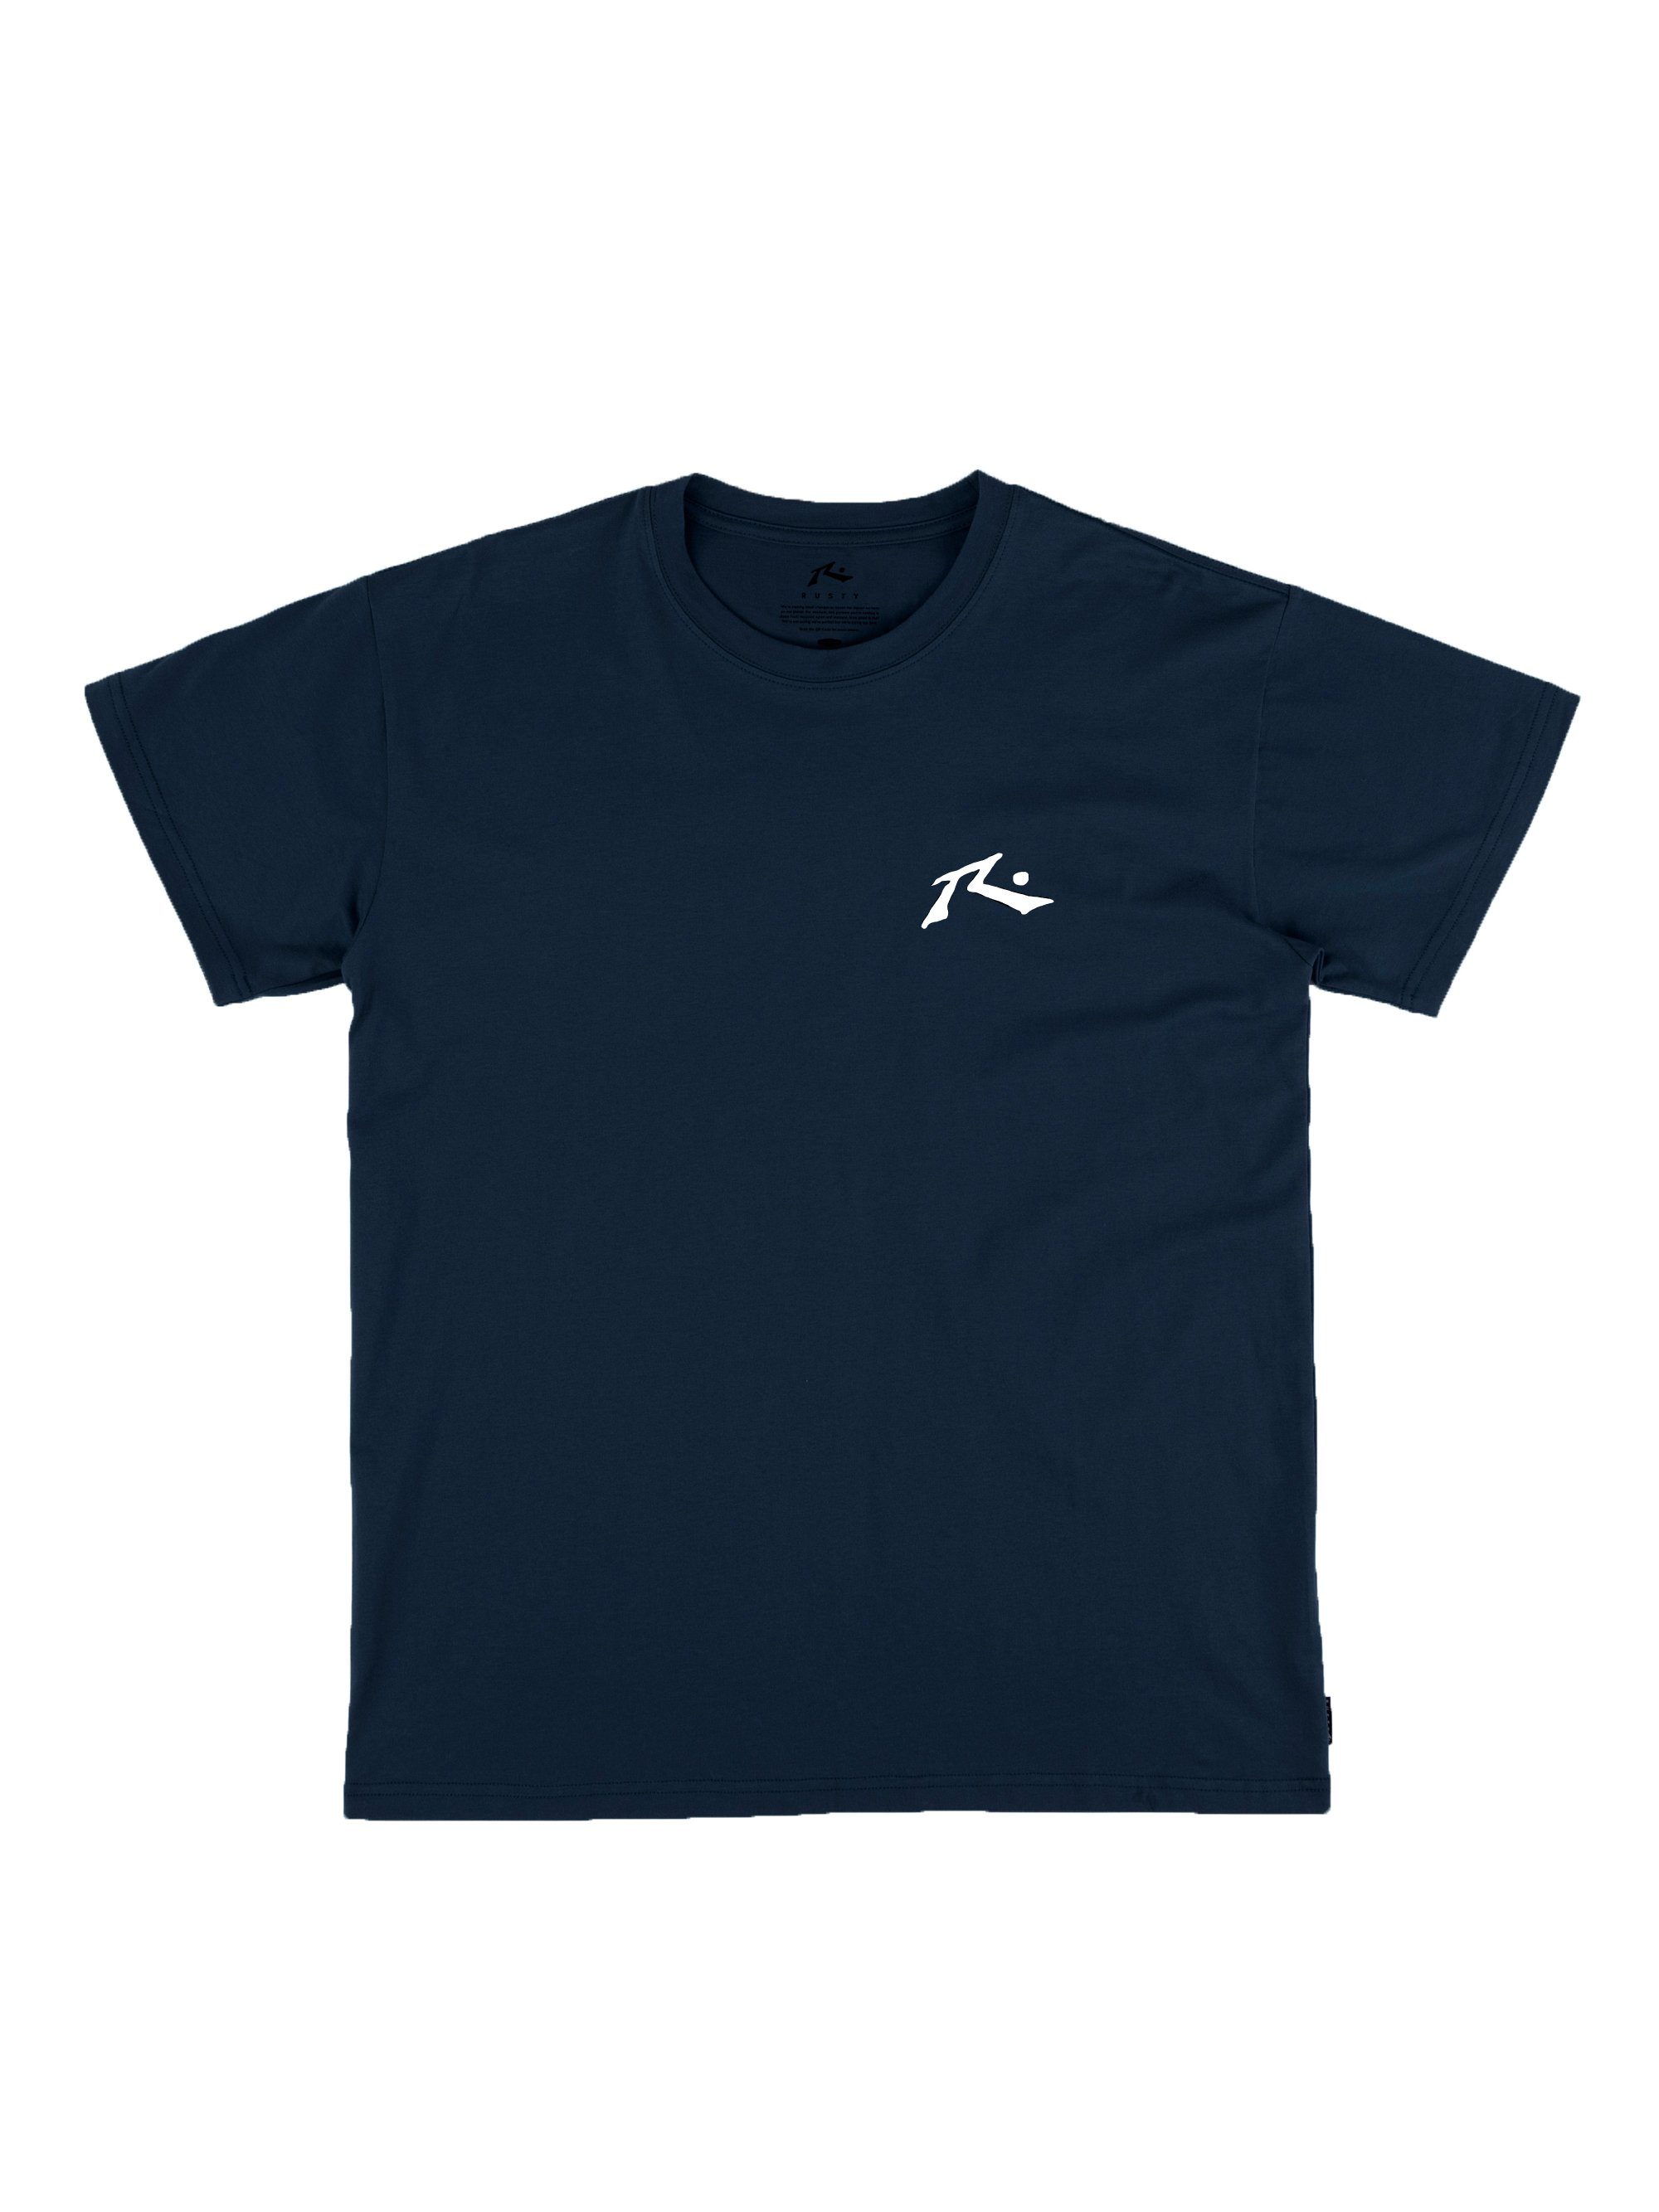 SLEEVE SHORT Navy Rusty COMPETITION TEE T-Shirt Blue